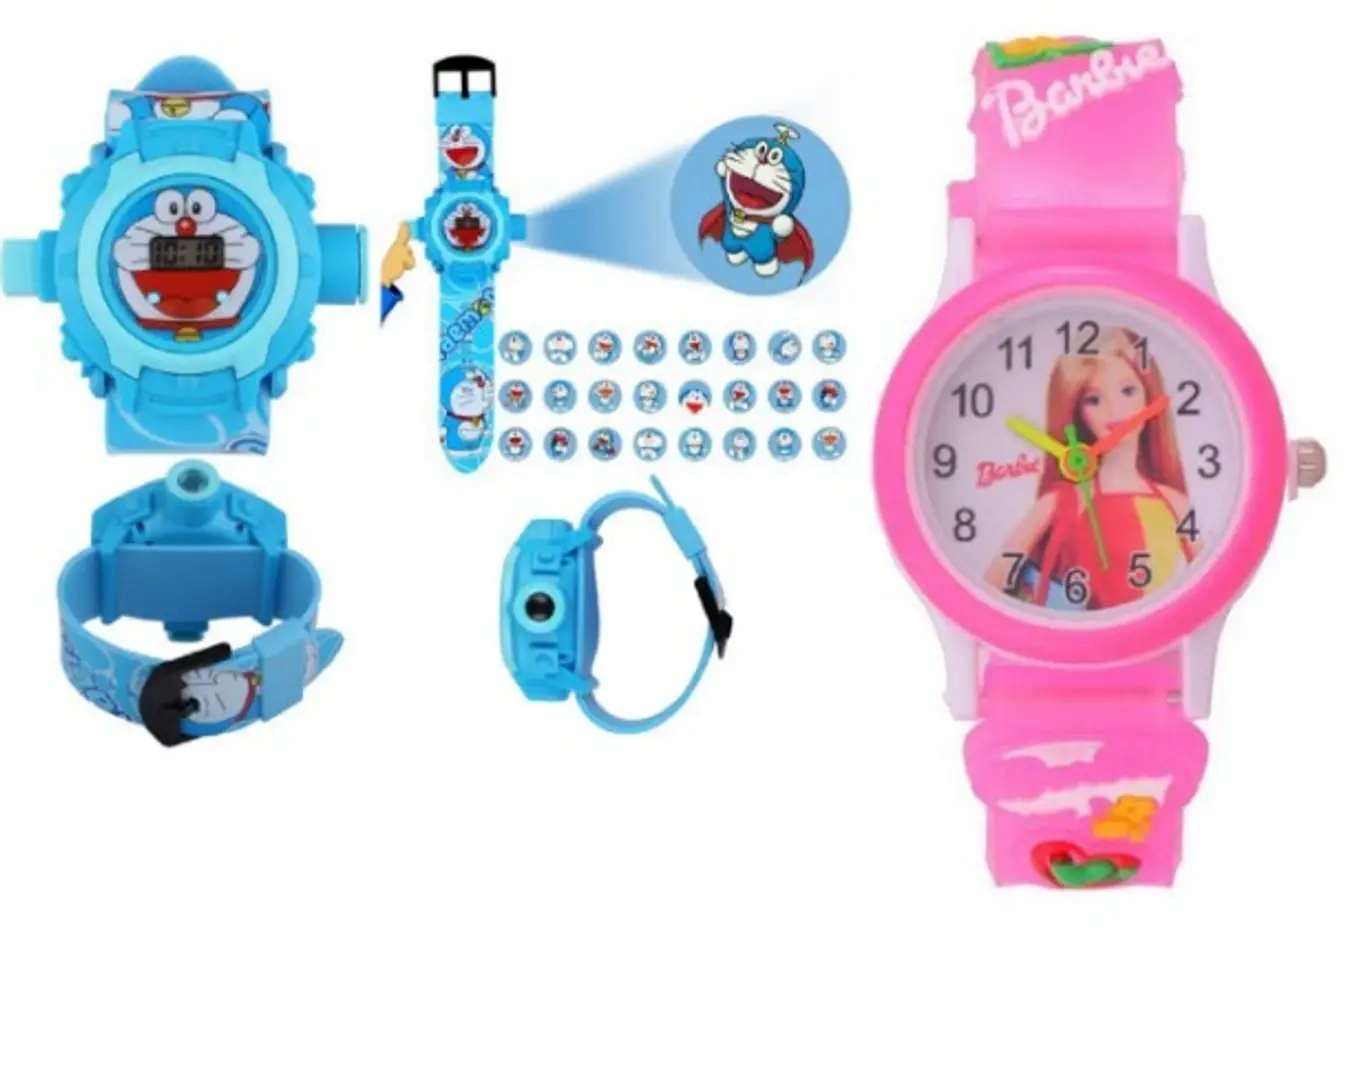 Johnnie Boy Barbie Projector Watch for Girls|Digital Toy Watch|24 Grids  with Focus Setting| Price in India - Buy Johnnie Boy Barbie Projector Watch  for Girls|Digital Toy Watch|24 Grids with Focus Setting| online